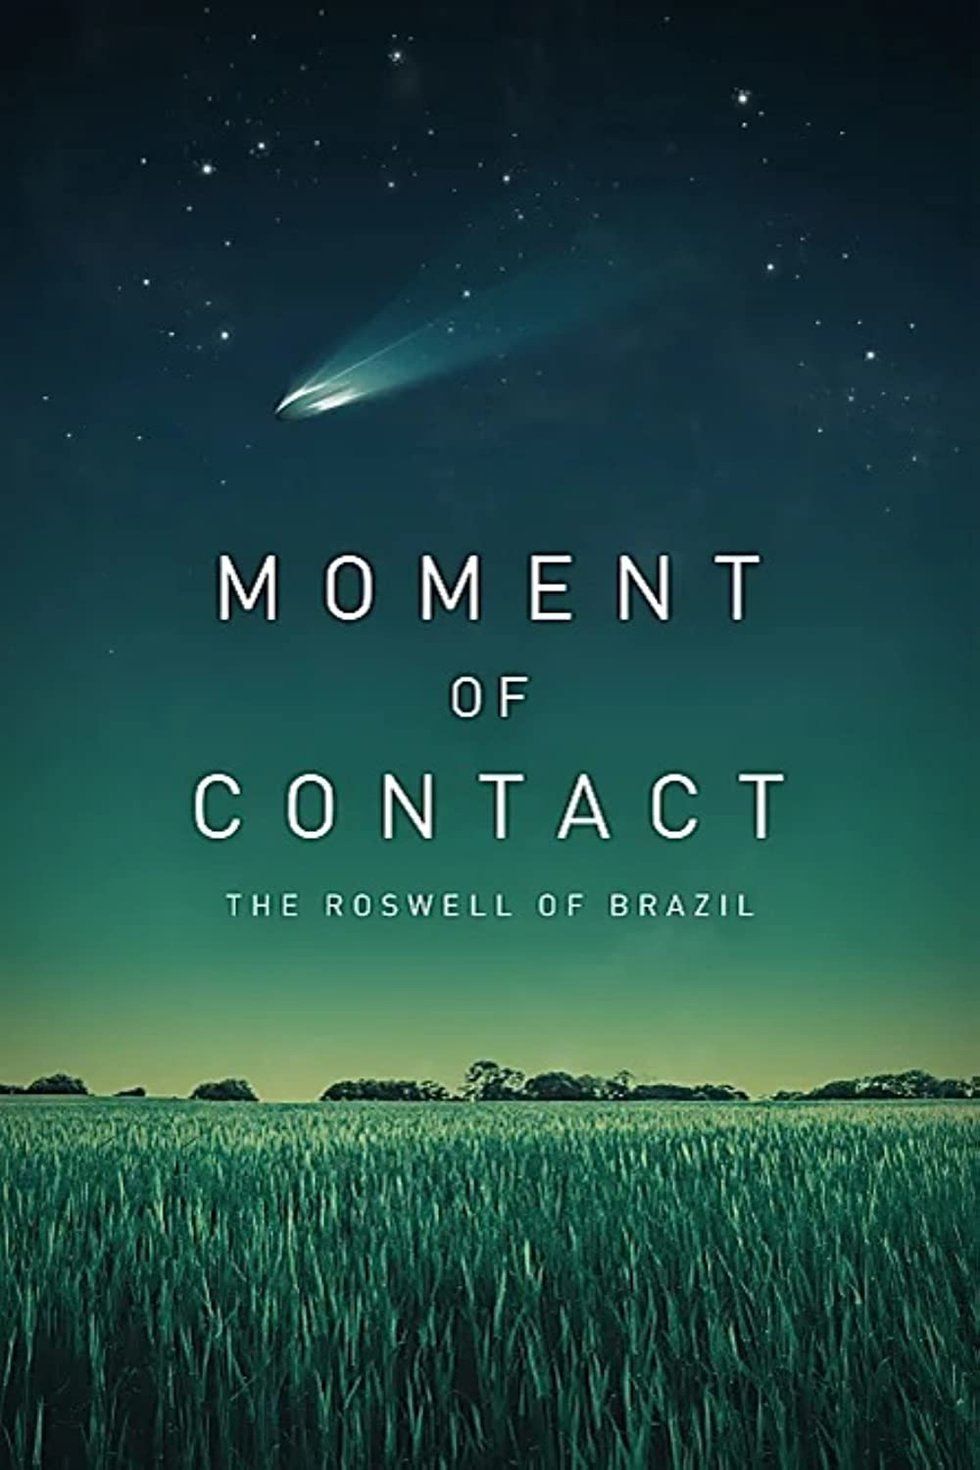 Moment of Contact Science Documentary